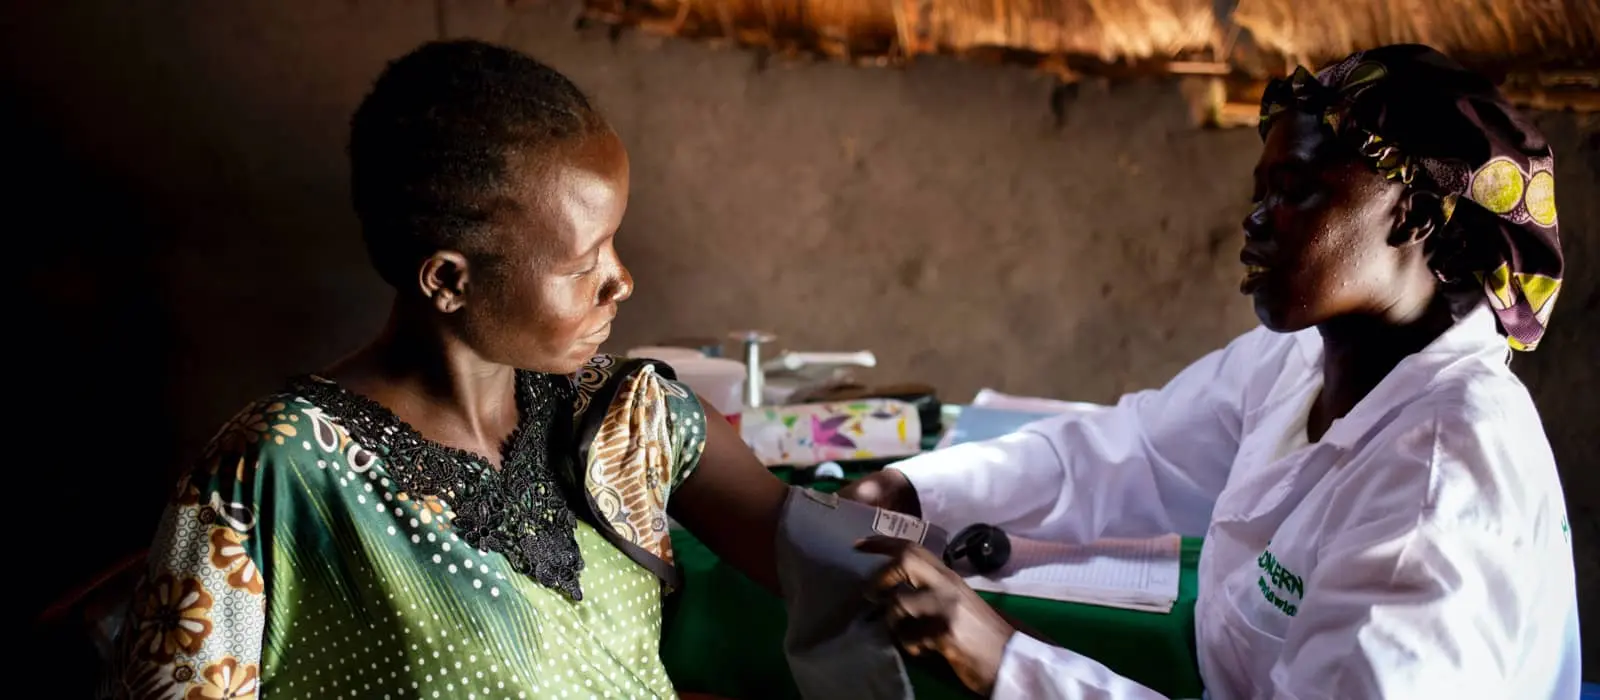 Pregnant Arek Mabior, 28 is seen by Concern midwife Rebekka at a Mobile Health Clinic in Mayomkuol, a remote rural area of Aweil, South Sudan.